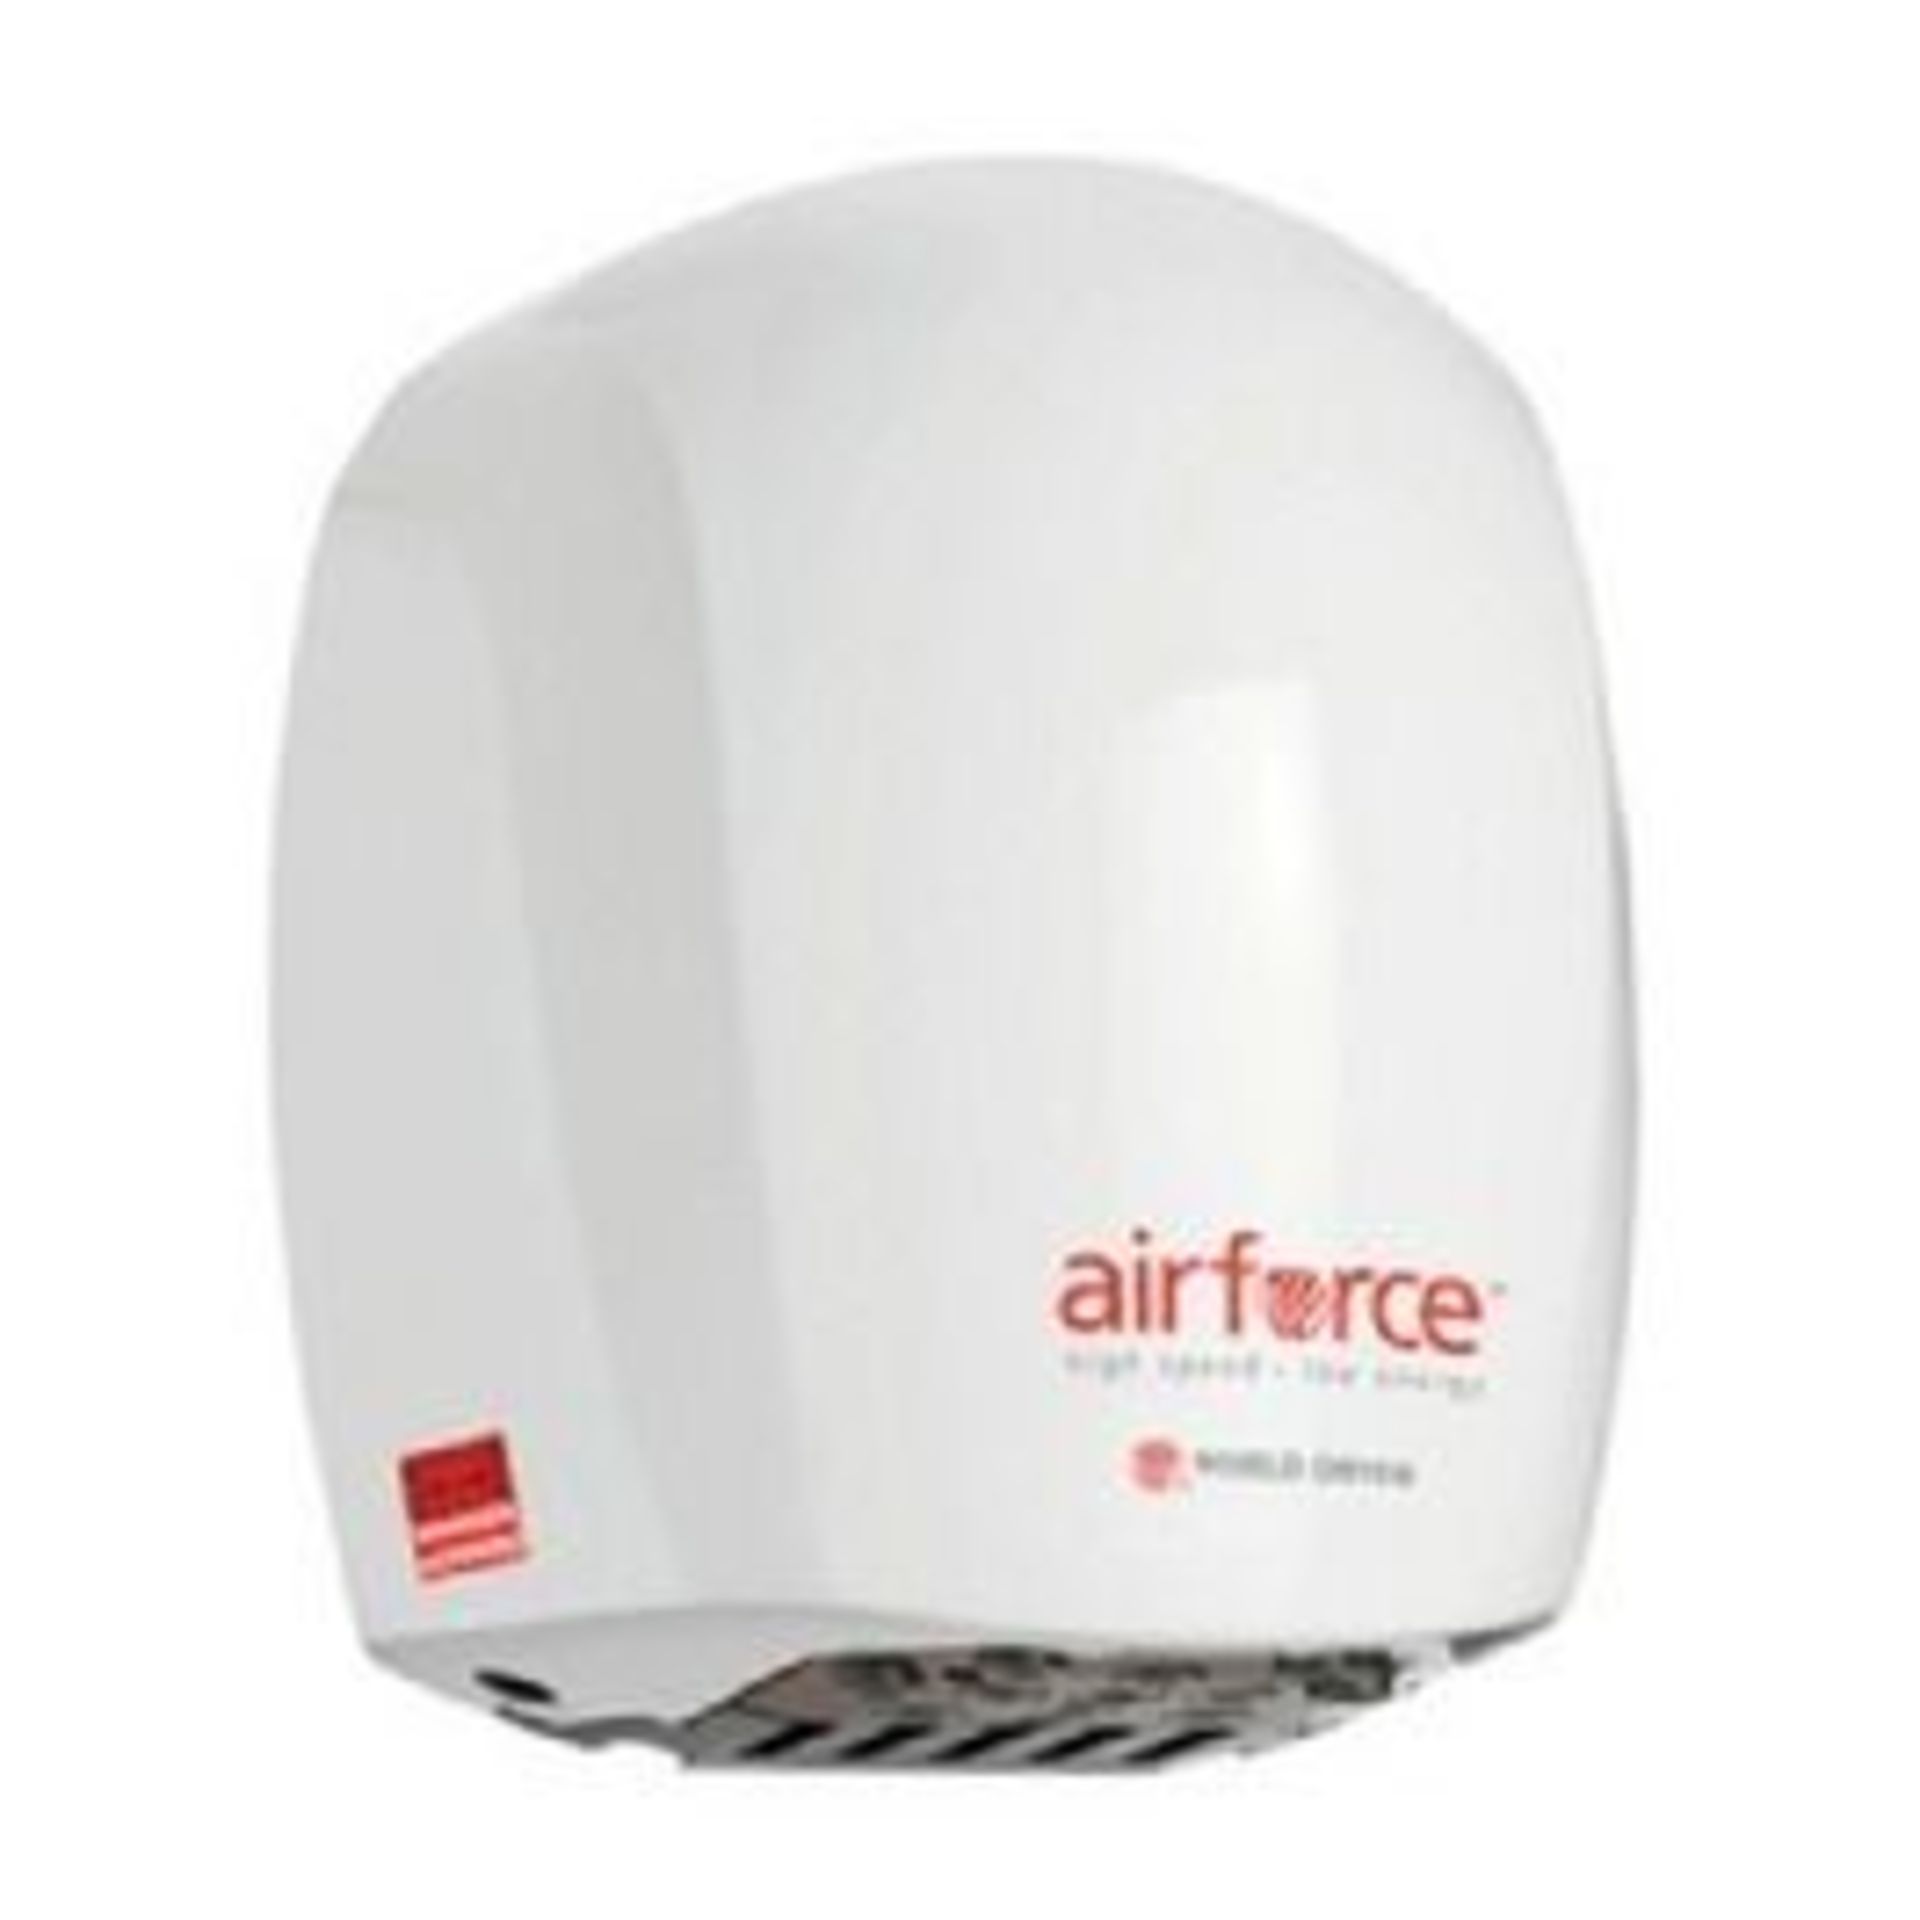 1 x Air Force High Speed Low Energy Electric Hand Dryer - Mode J48-974W3 - Brand New and Boxed - - Image 3 of 4